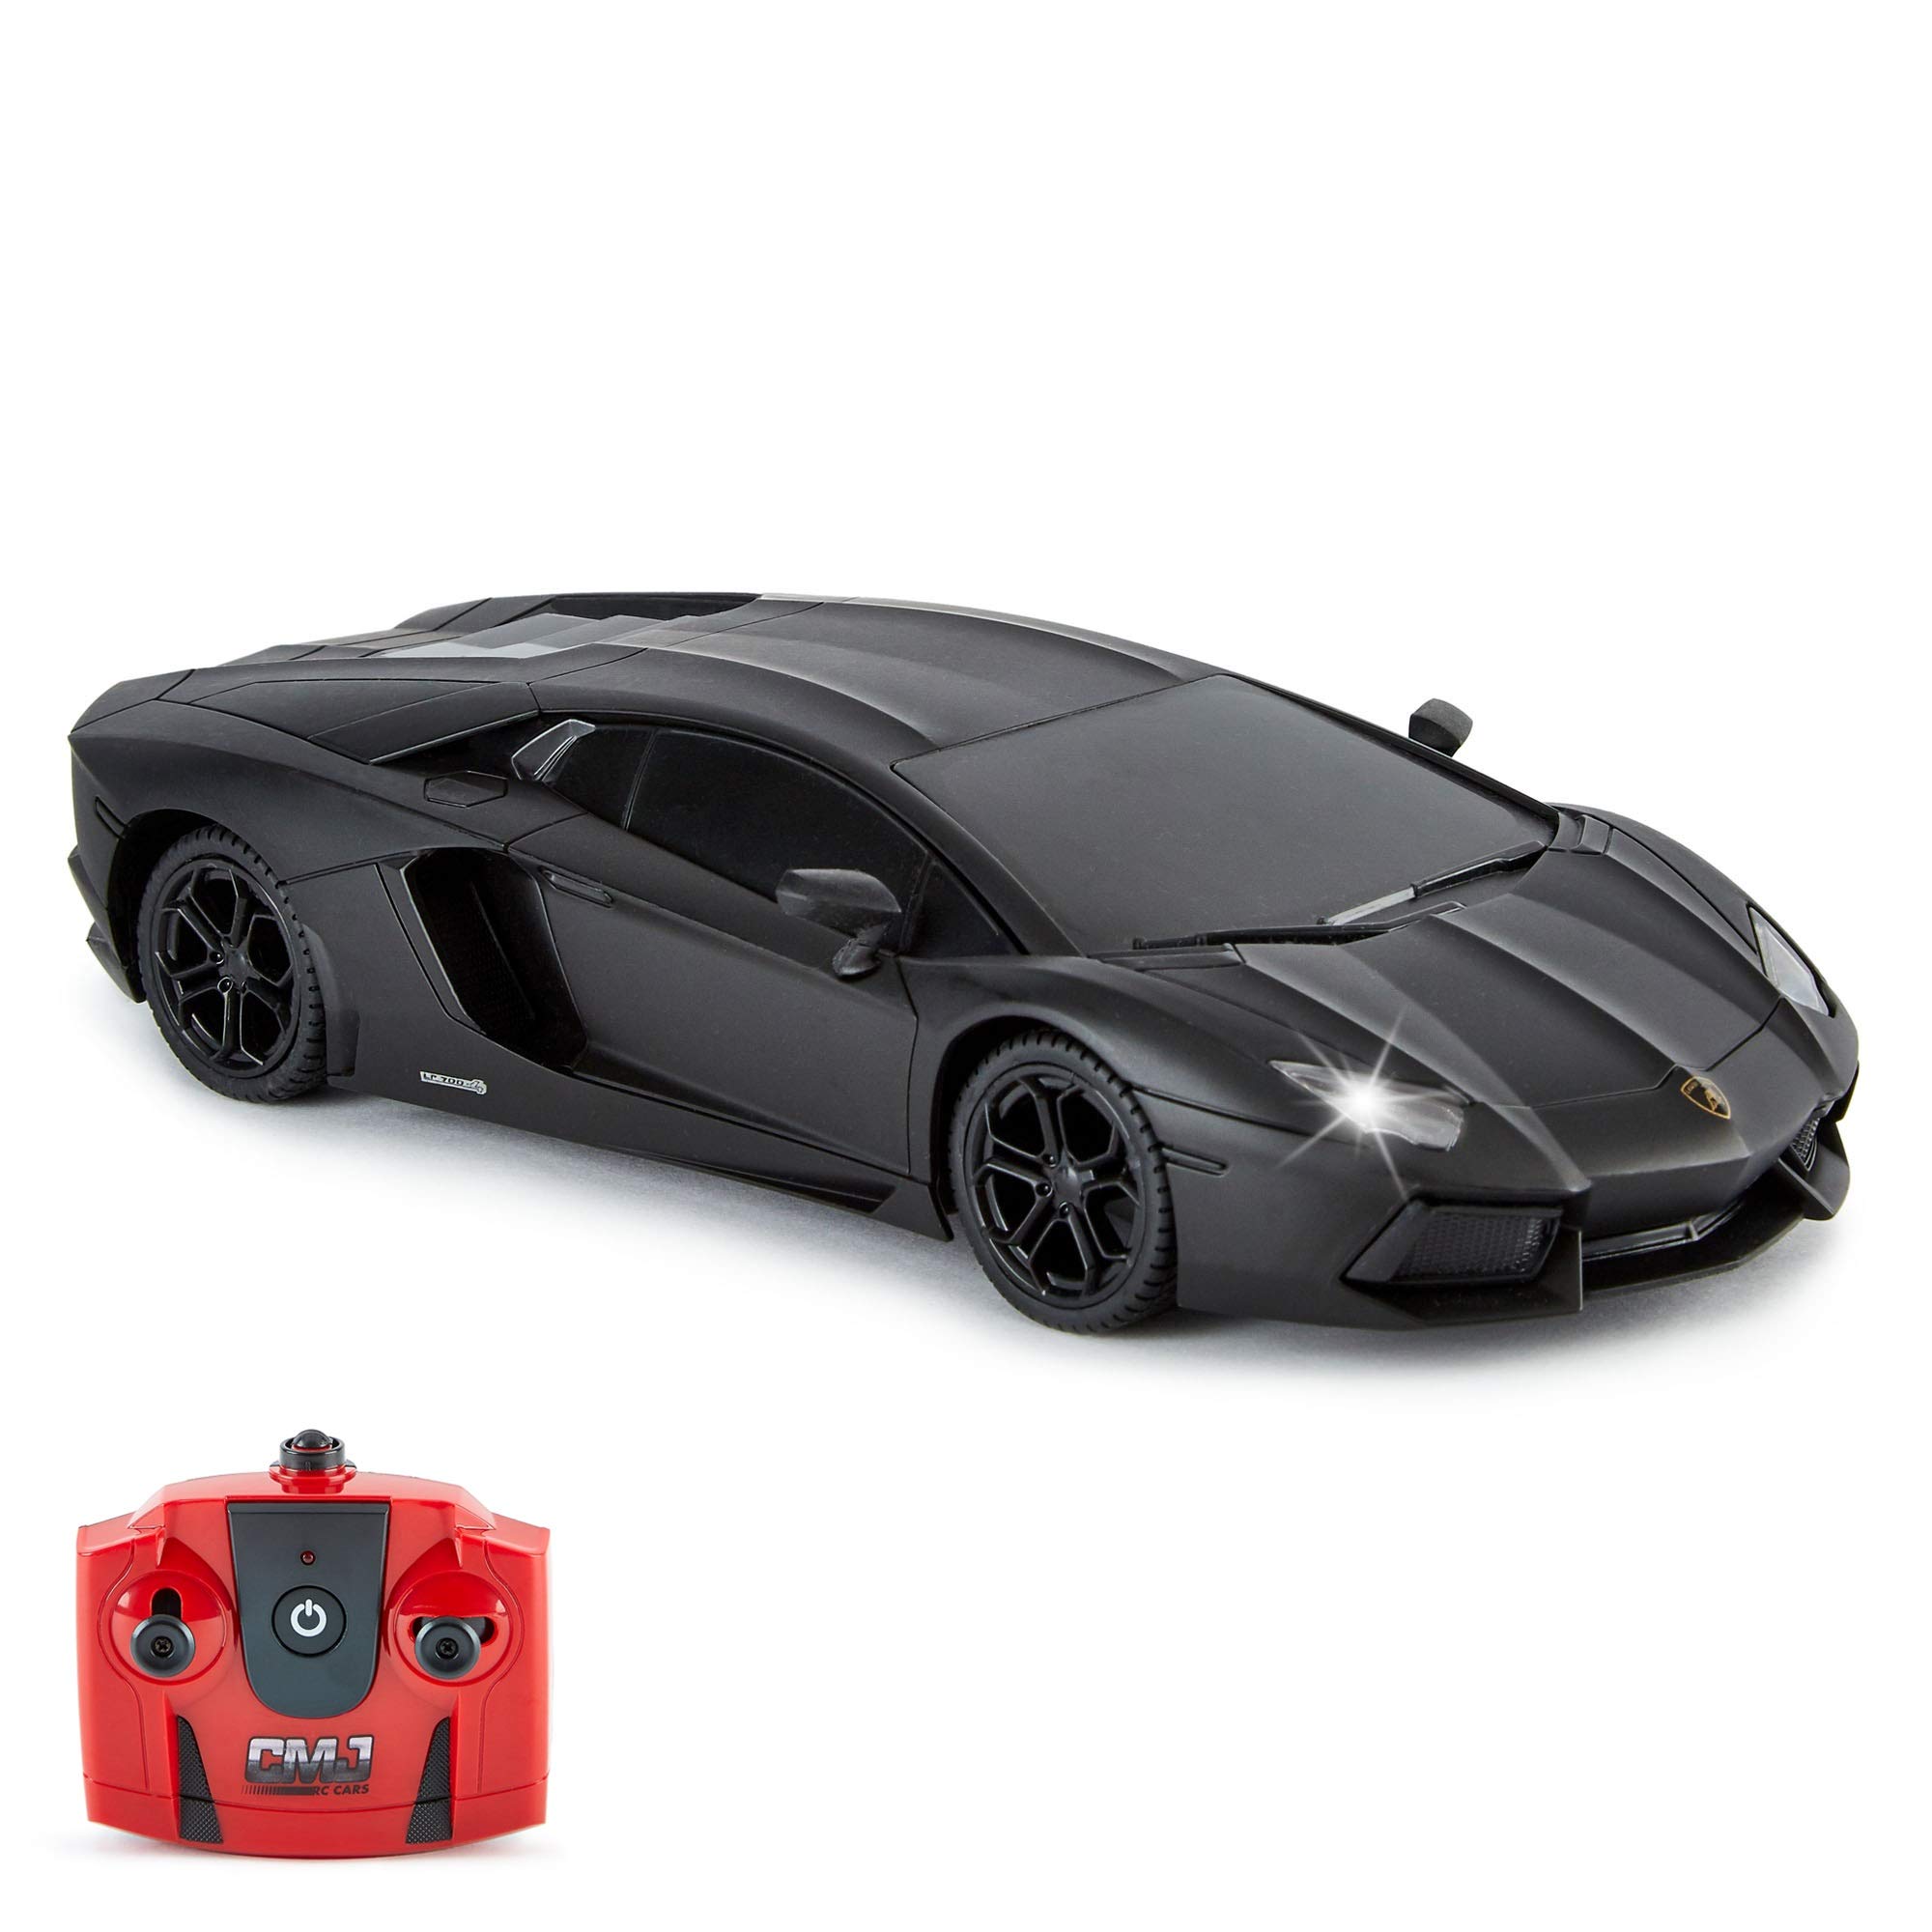 Mua Lamborghini Aventador Official Licensed Remote Control Car with Working  Lights, Radio Controlled On Road RC Car 1:24 Scale,  Matte Black,  Great Toys for Boys and Girls trên Amazon Anh chính